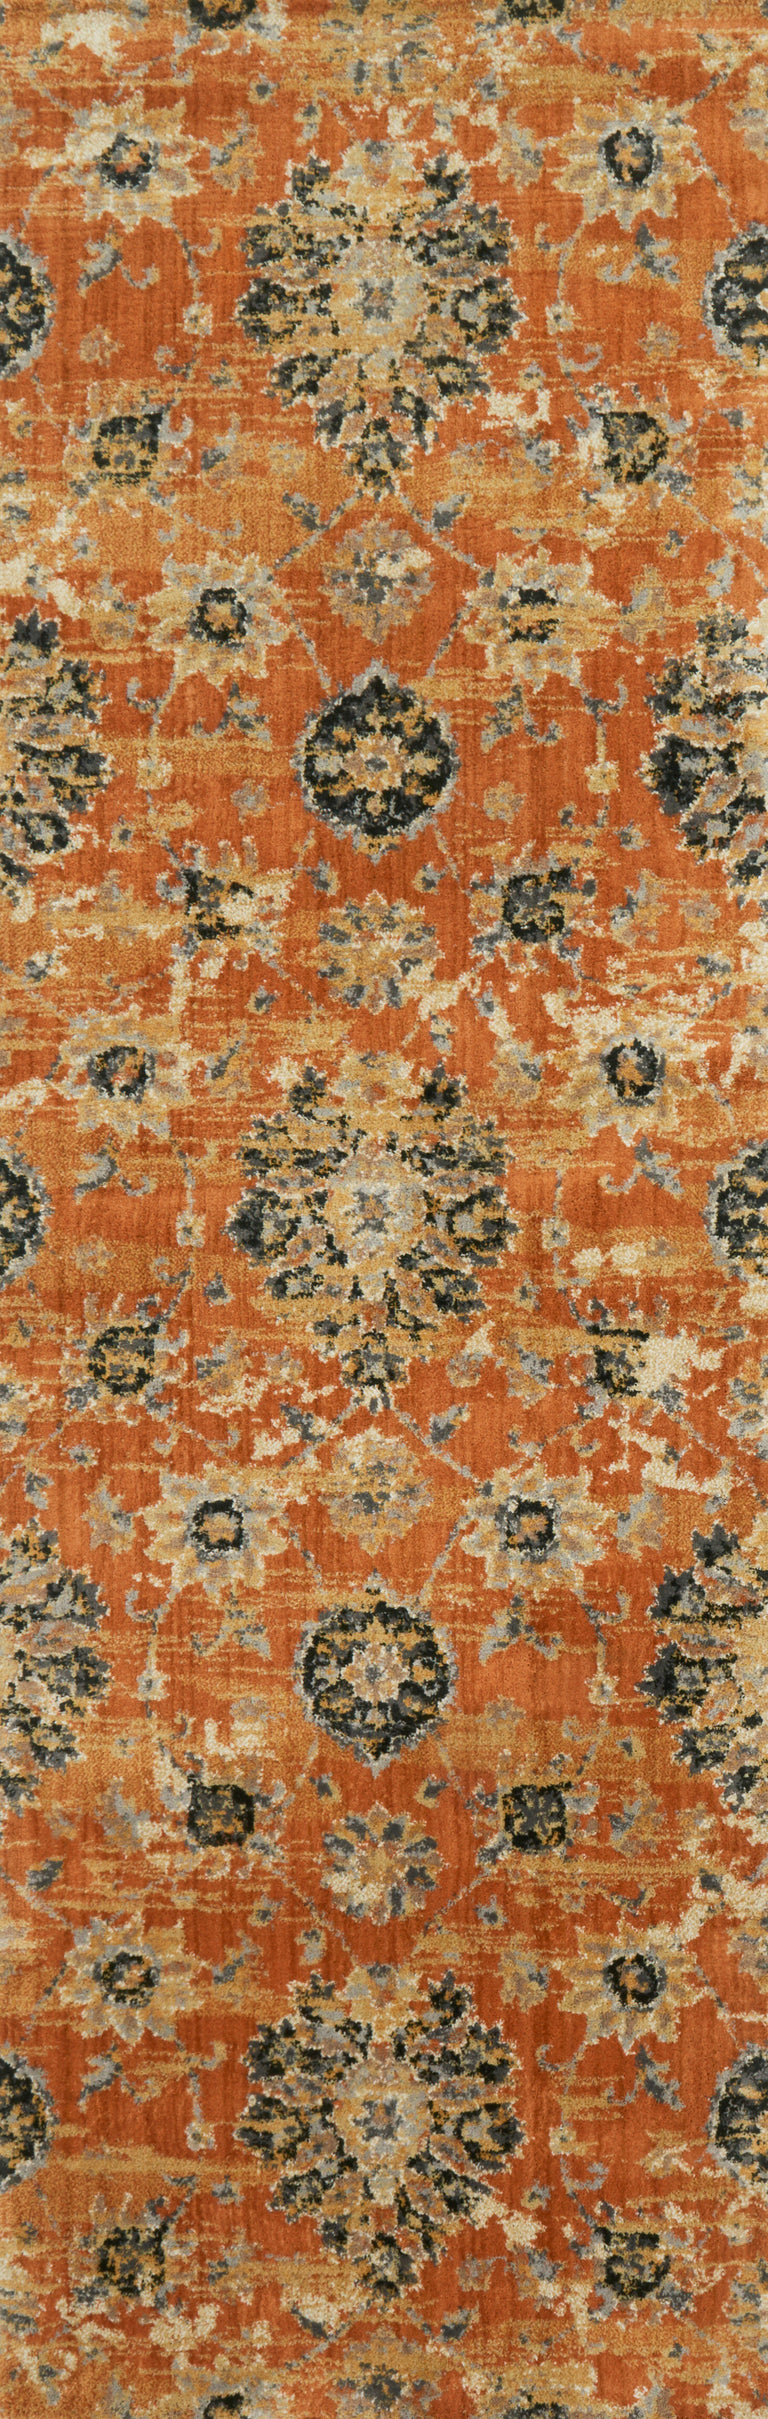 Loloi Rugs Torrance Collection Rug in Rust - 9'3" x 13'